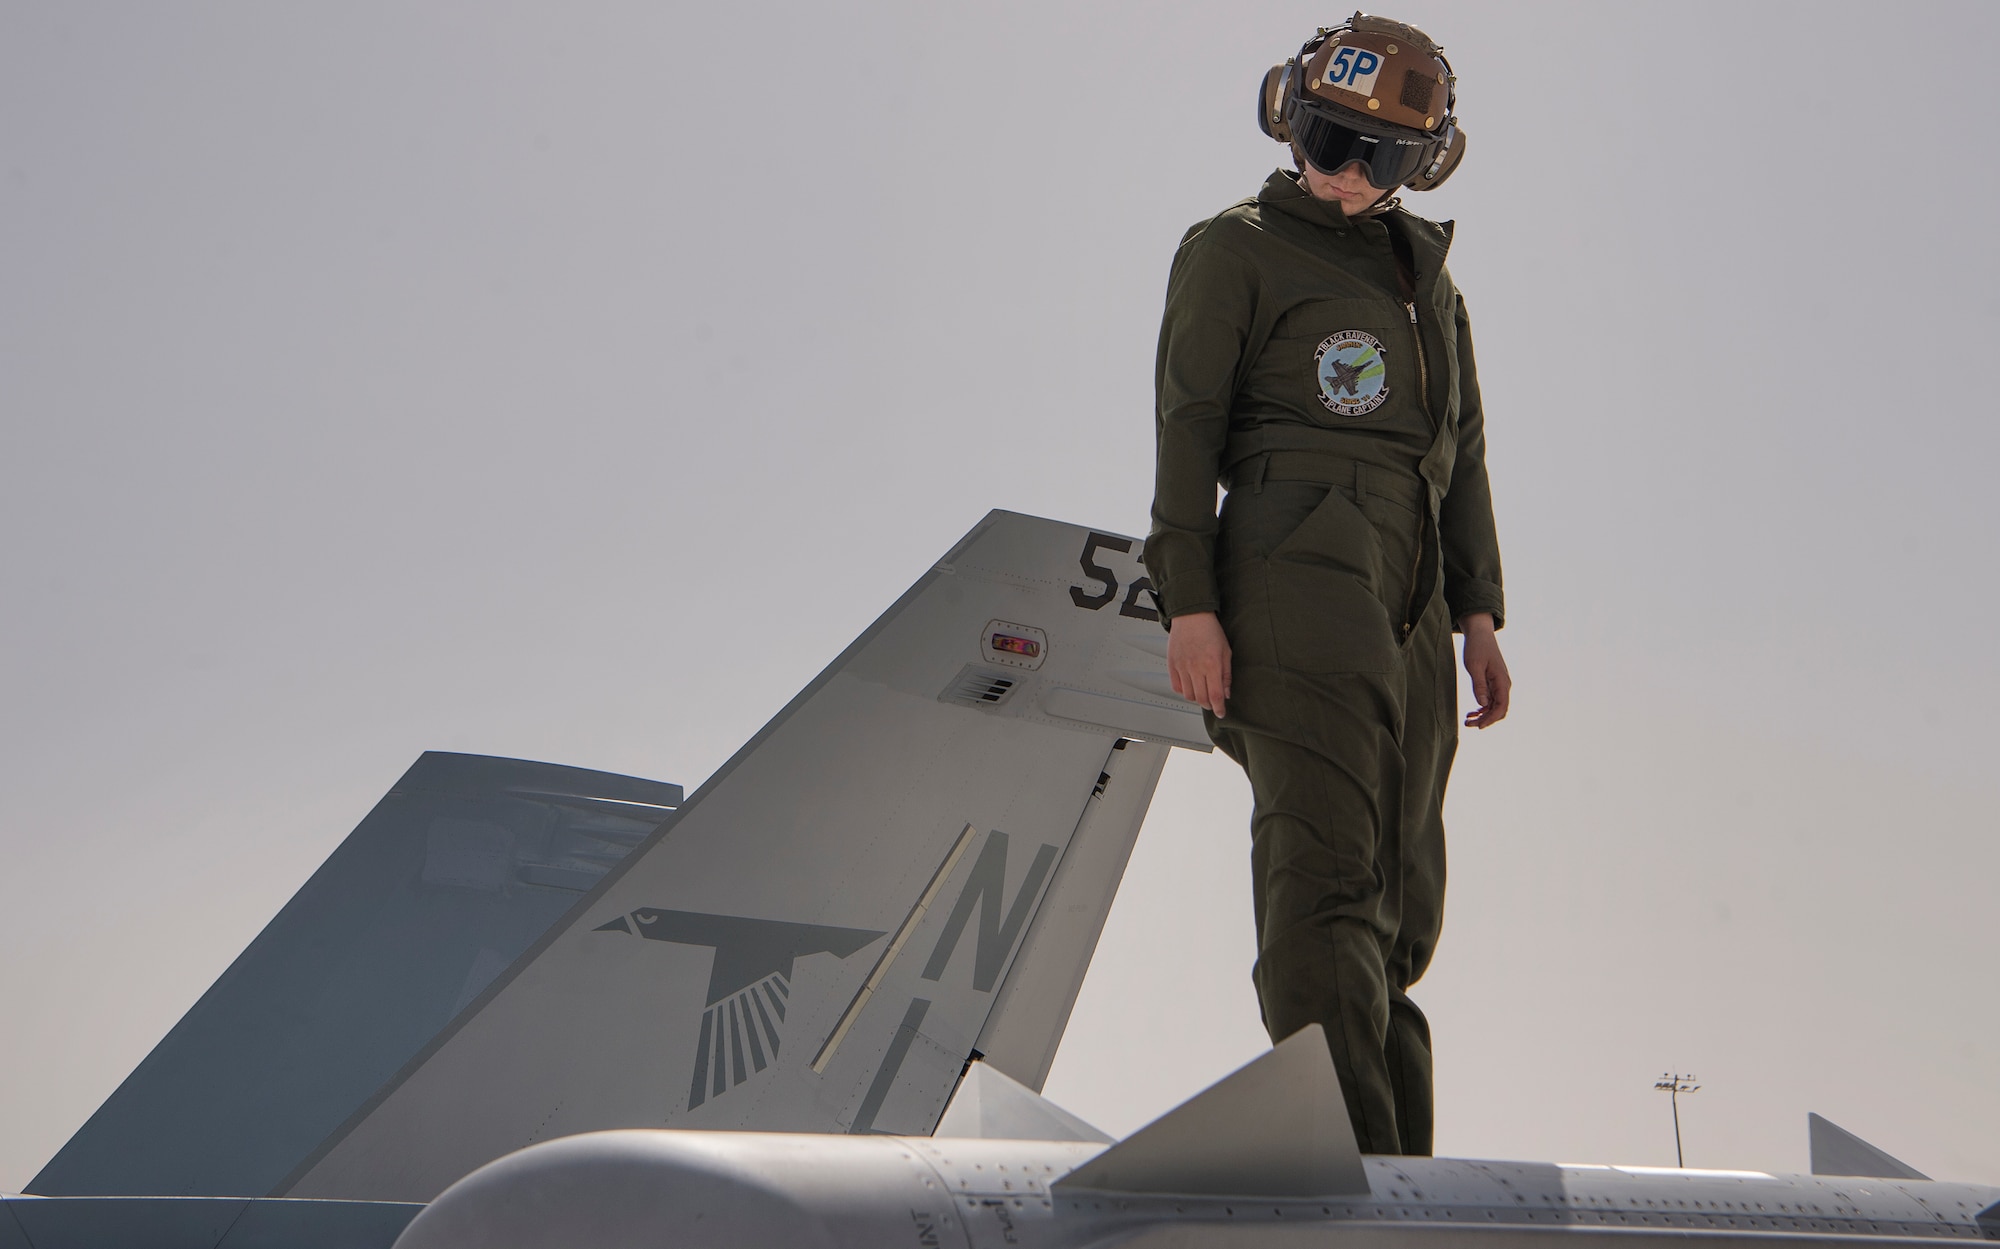 U.S. Navy Airman Madison Arthur, Electronic Attack Squadron 135 (VAQ-135) “Black Ravens” aviation structural mechanic, examines the wing of an EA-18G Growler as part of a pre-launch inspection March 7, 2019, at Al Udeid Air Base, Qatar. VAQ-135 is deployed to the U.S. 5th Fleet area of operations in support of naval operations to ensure maritime stability and security in the Central Region, connecting the Mediterranean and the Pacific through the western Indian Ocean and three strategic choke points. Through the use of EA-18G Growler aircraft, VAQ-135 brings electronic based airborne attack and defense capabilities to Al Udeid’s joint environment by detecting, identifying, locating, and suppressing hostile “emitters.” (U.S. Air Force photo by Tech. Sgt. Christopher Hubenthal)